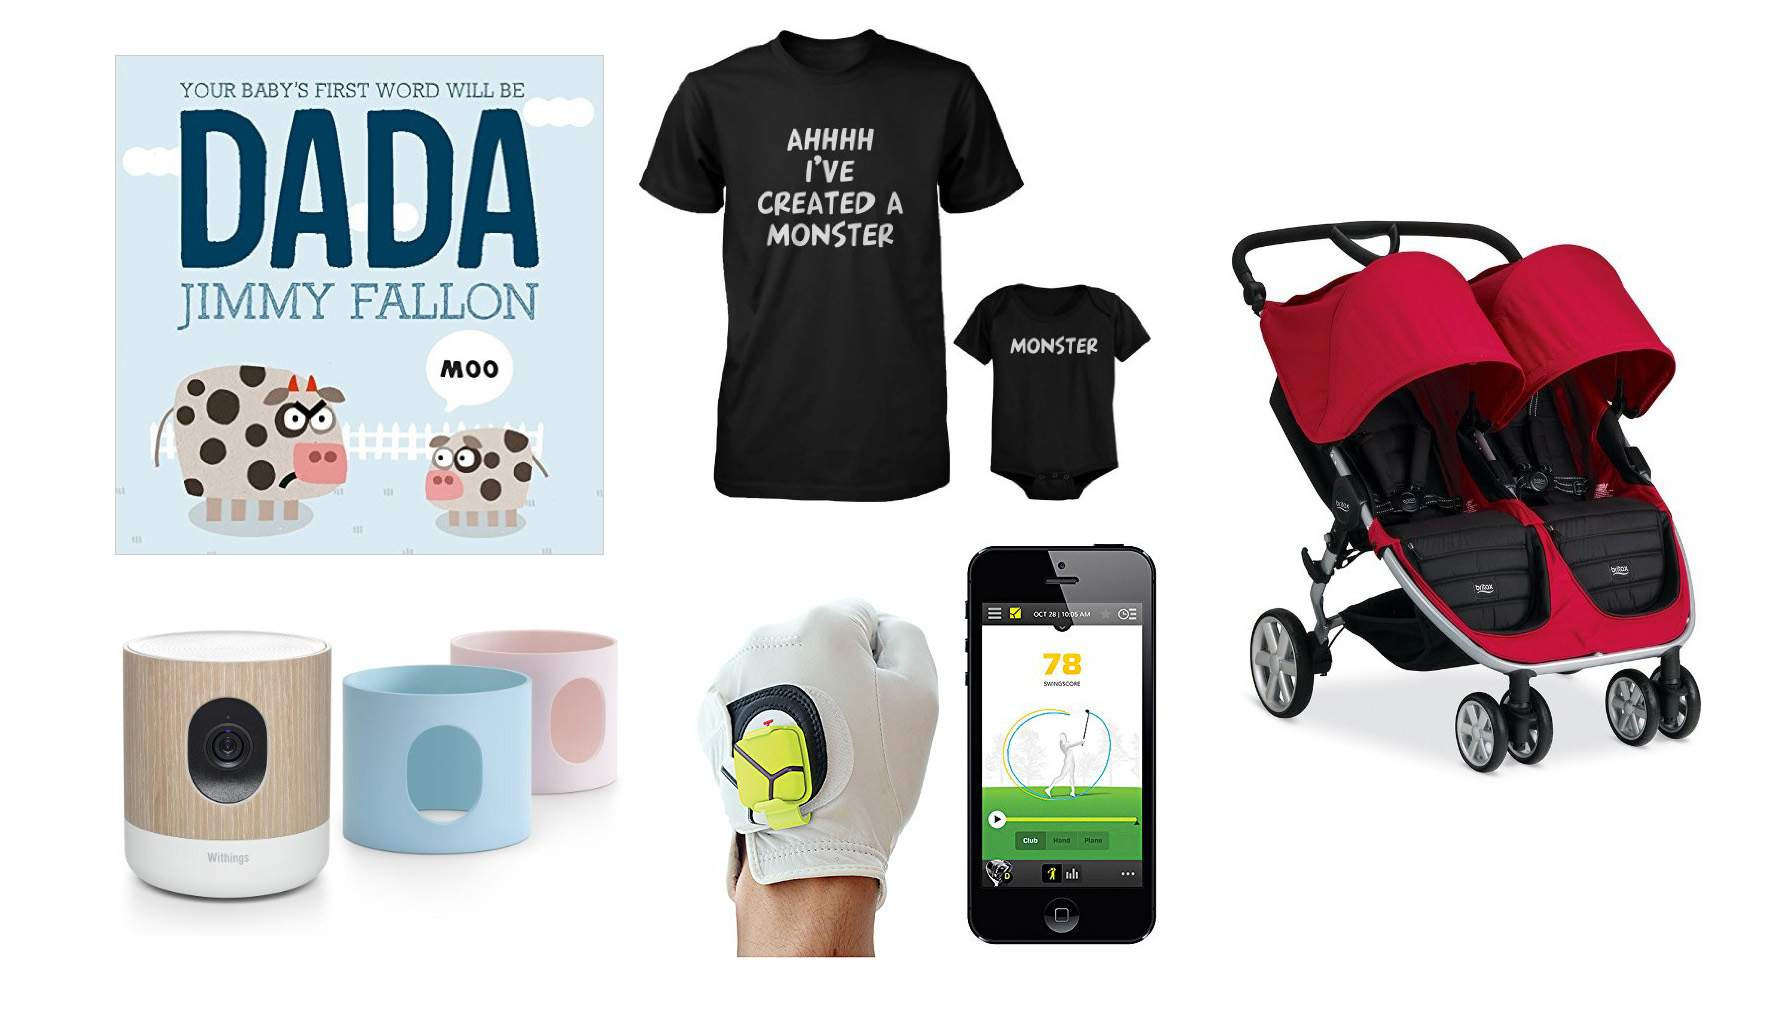 New Dad Father'S Day Gift Ideas
 Top 10 Best Father’s Day Gifts for New Dads